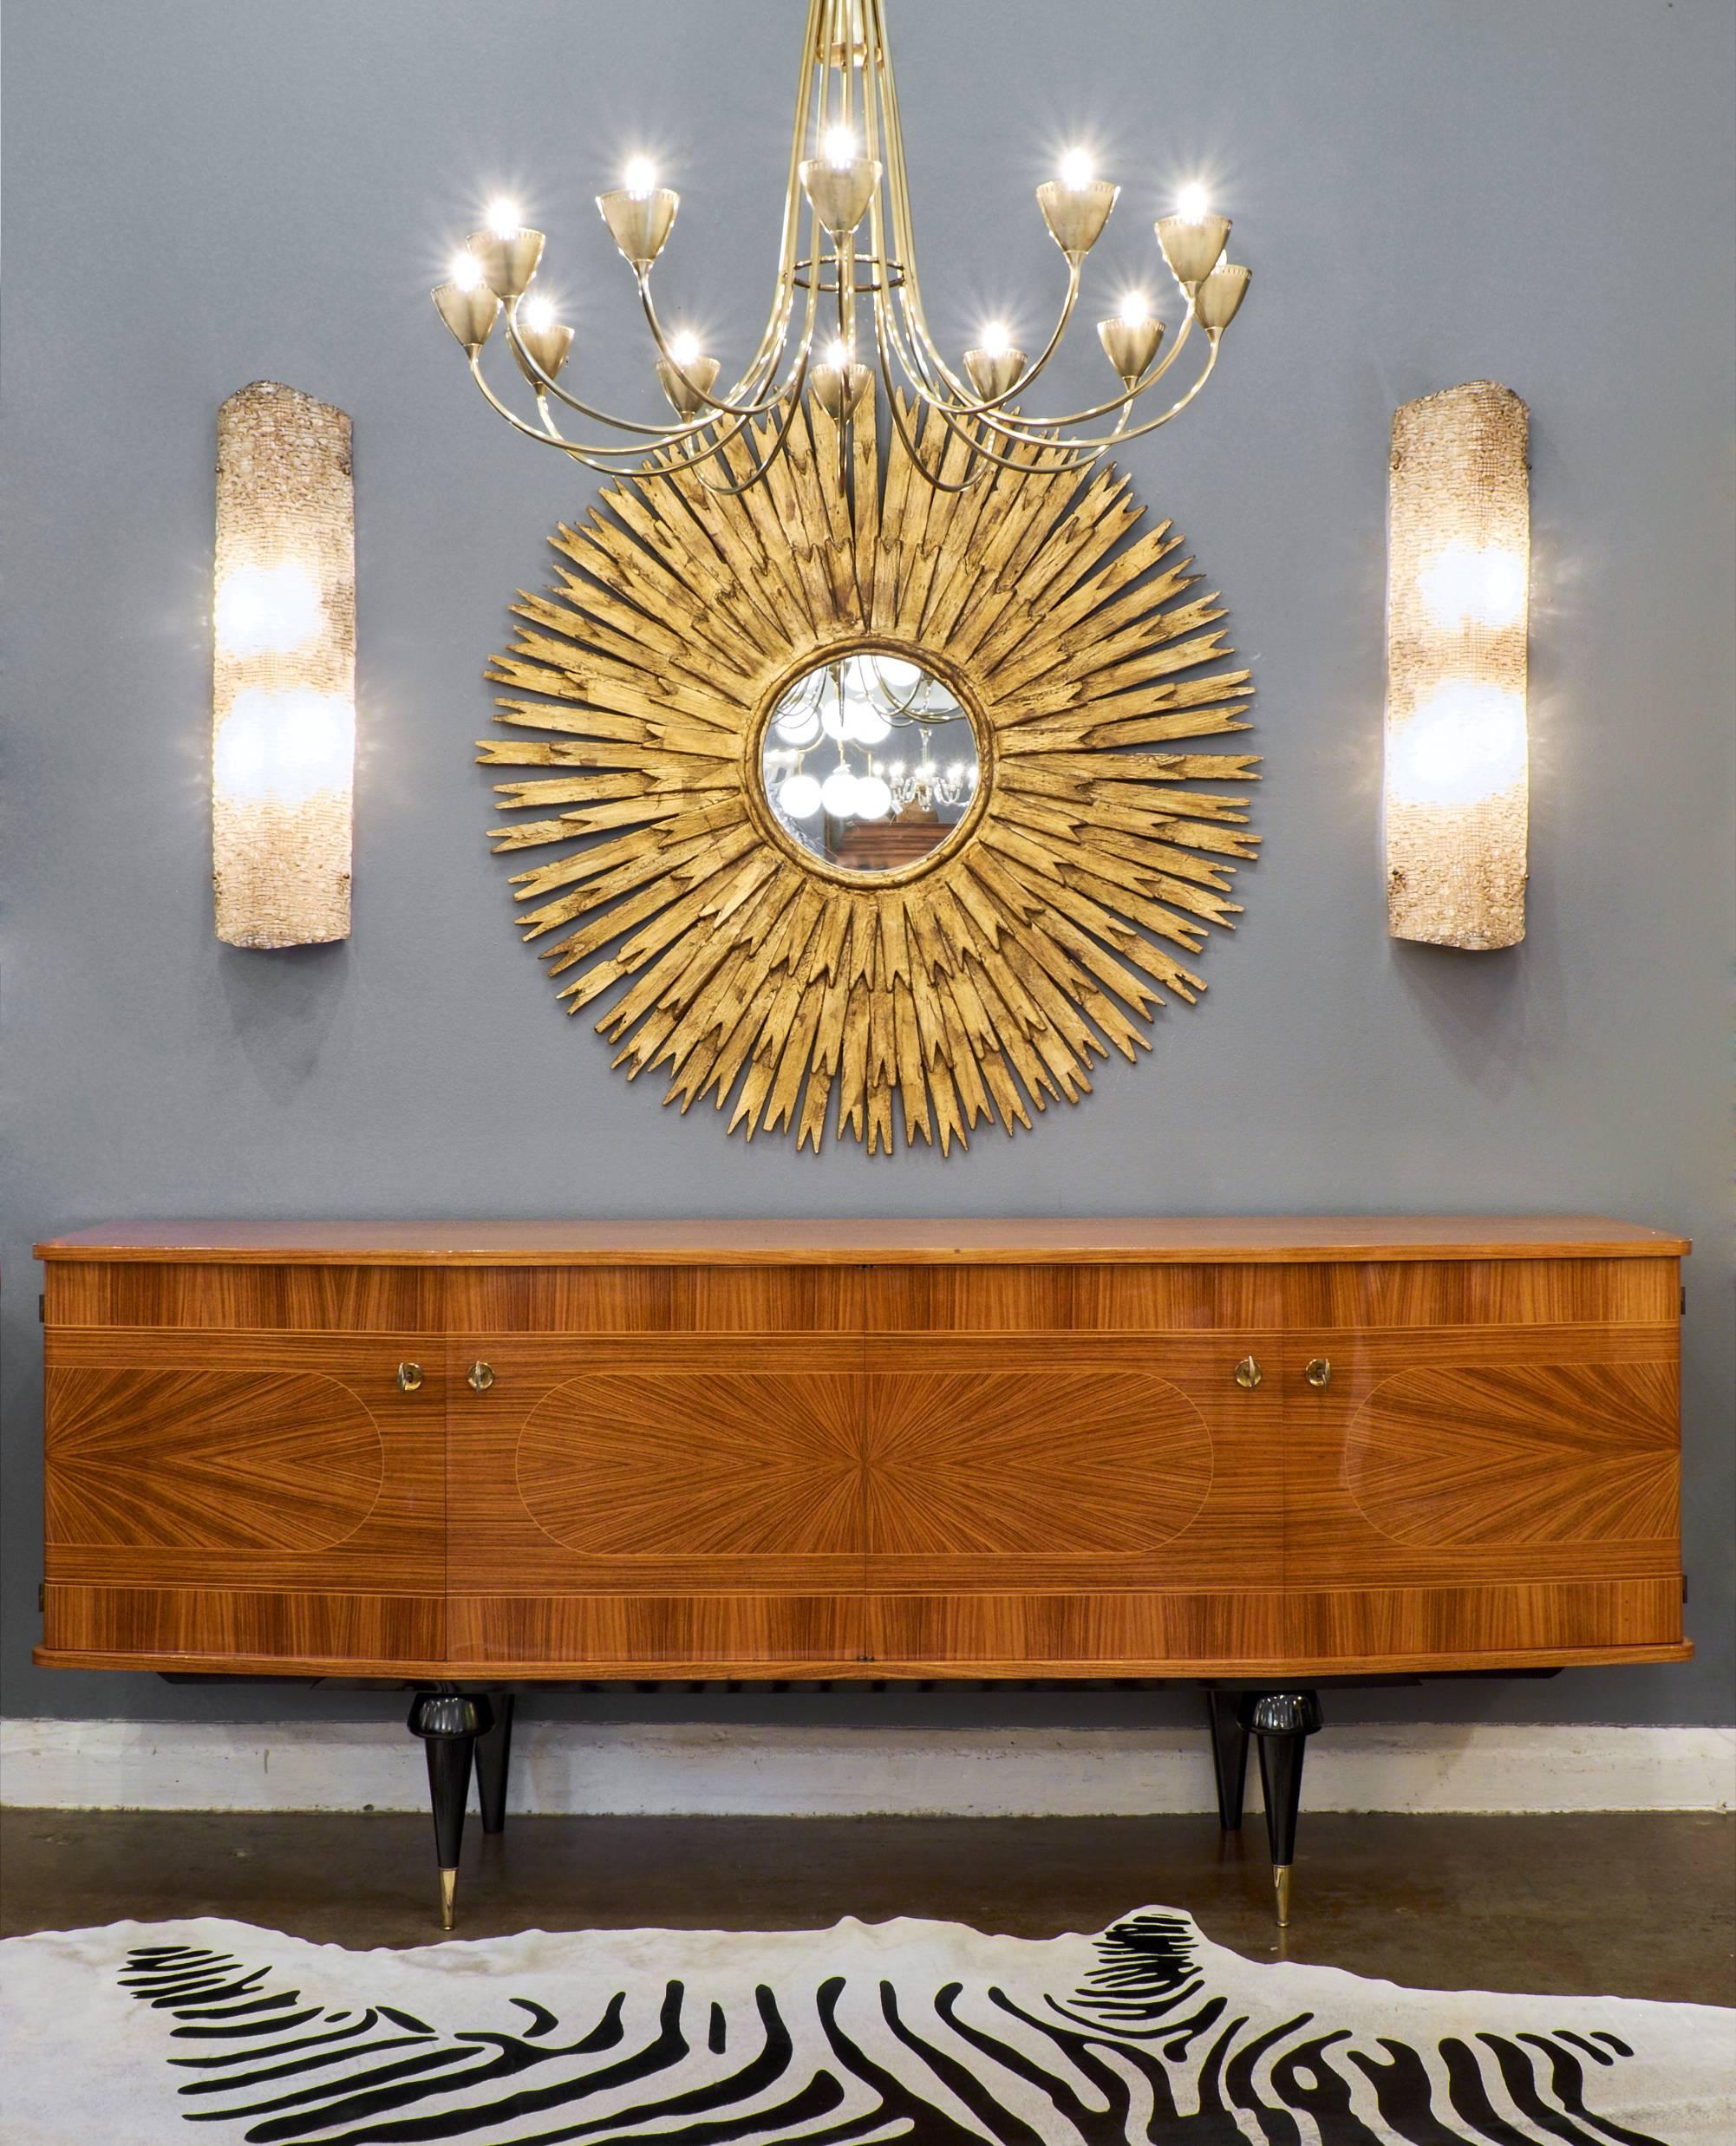 Spanish vintage pair of large gold leaf sunburst mirrors with three layers of rays surrounding original round mirrors. A spectacular size for a maximum decorative impact.